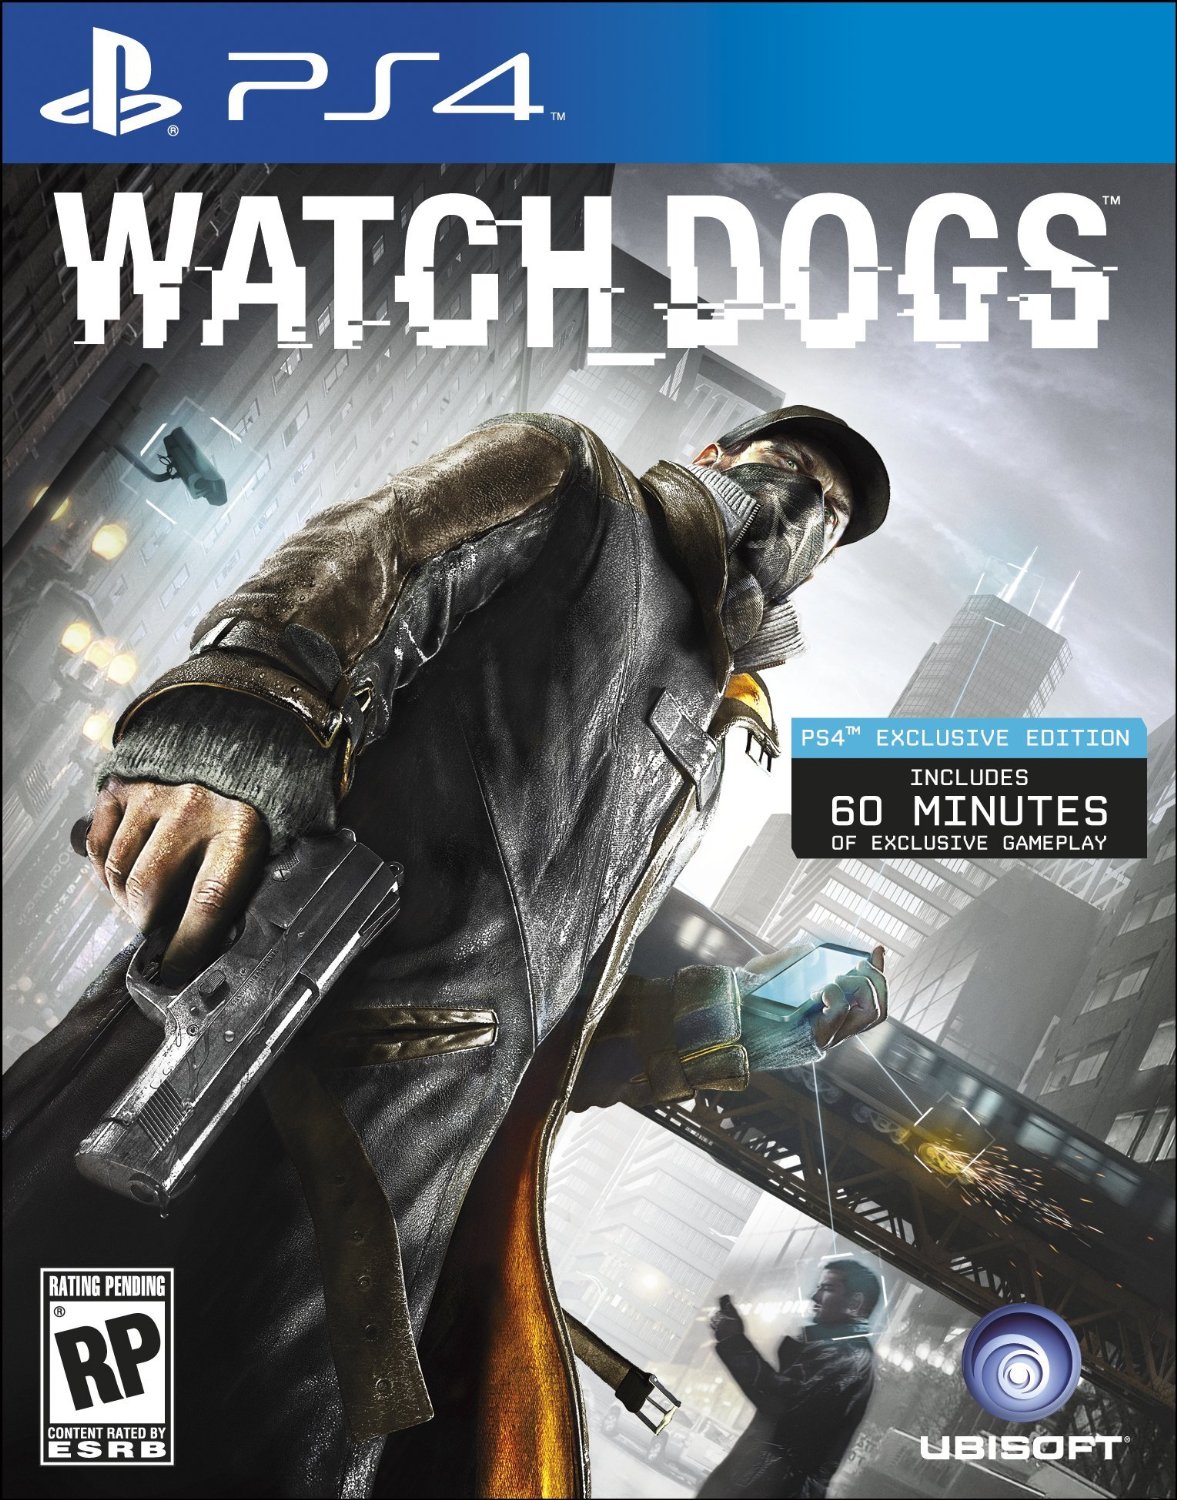 watch dogs ps4 box